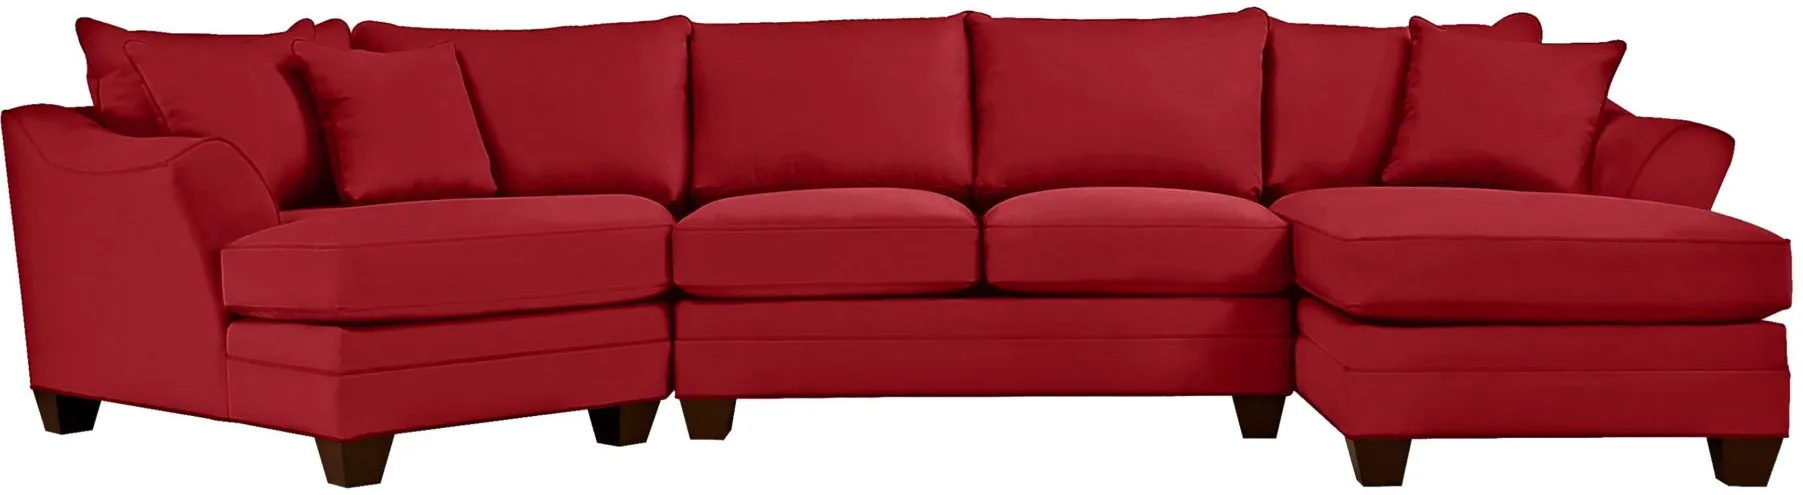 Foresthill 3-pc. Right Hand Facing Sectional Sofa in Suede So Soft Cardinal by H.M. Richards